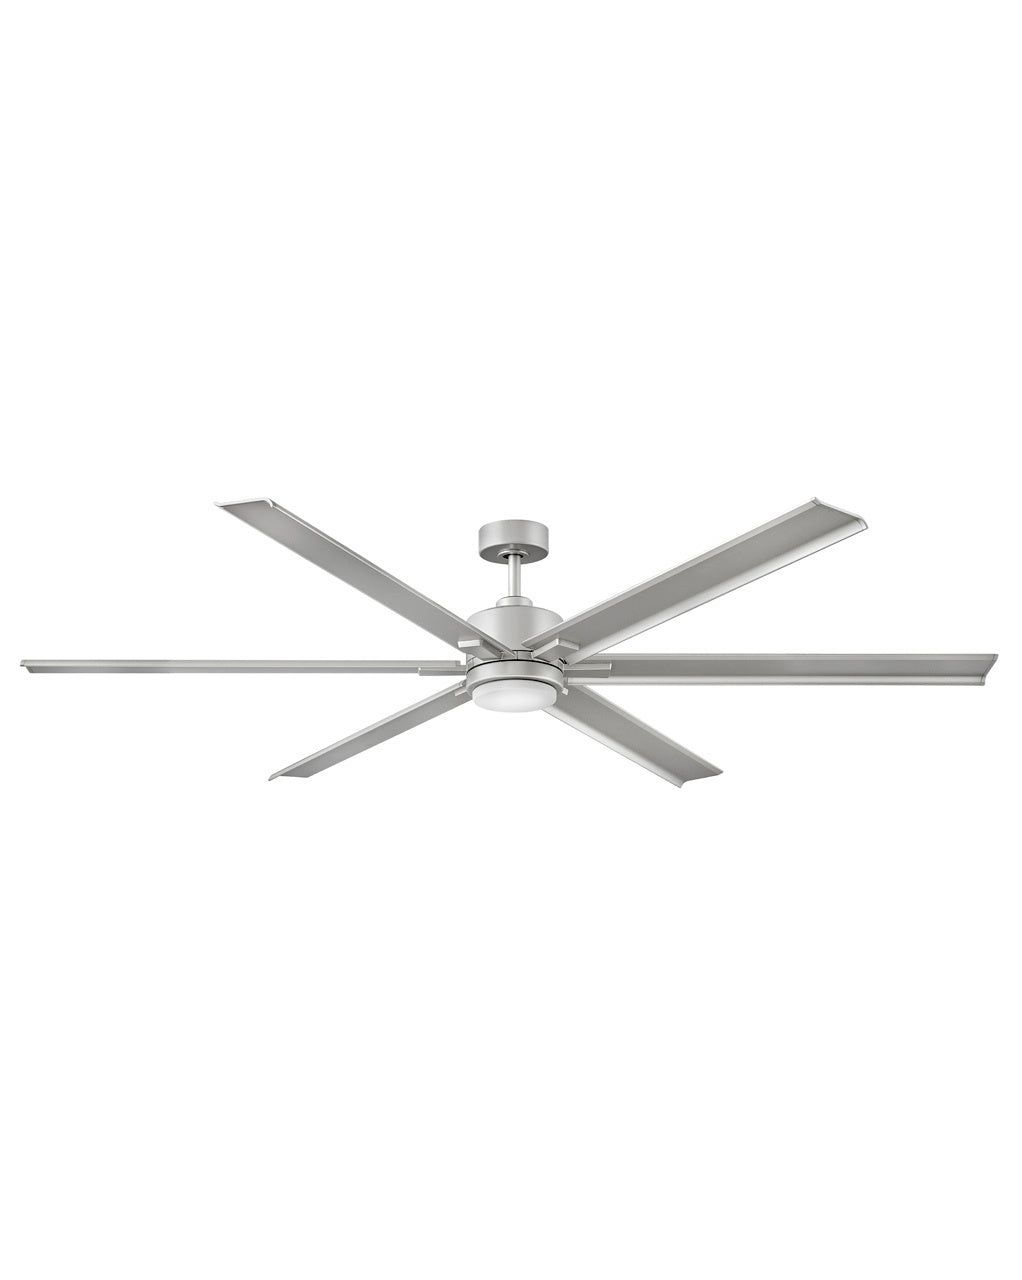 Hinkley Canada - 82``Ceiling Fan - Indy Maxx - Brushed Nickel- Union Lighting Luminaires Decor